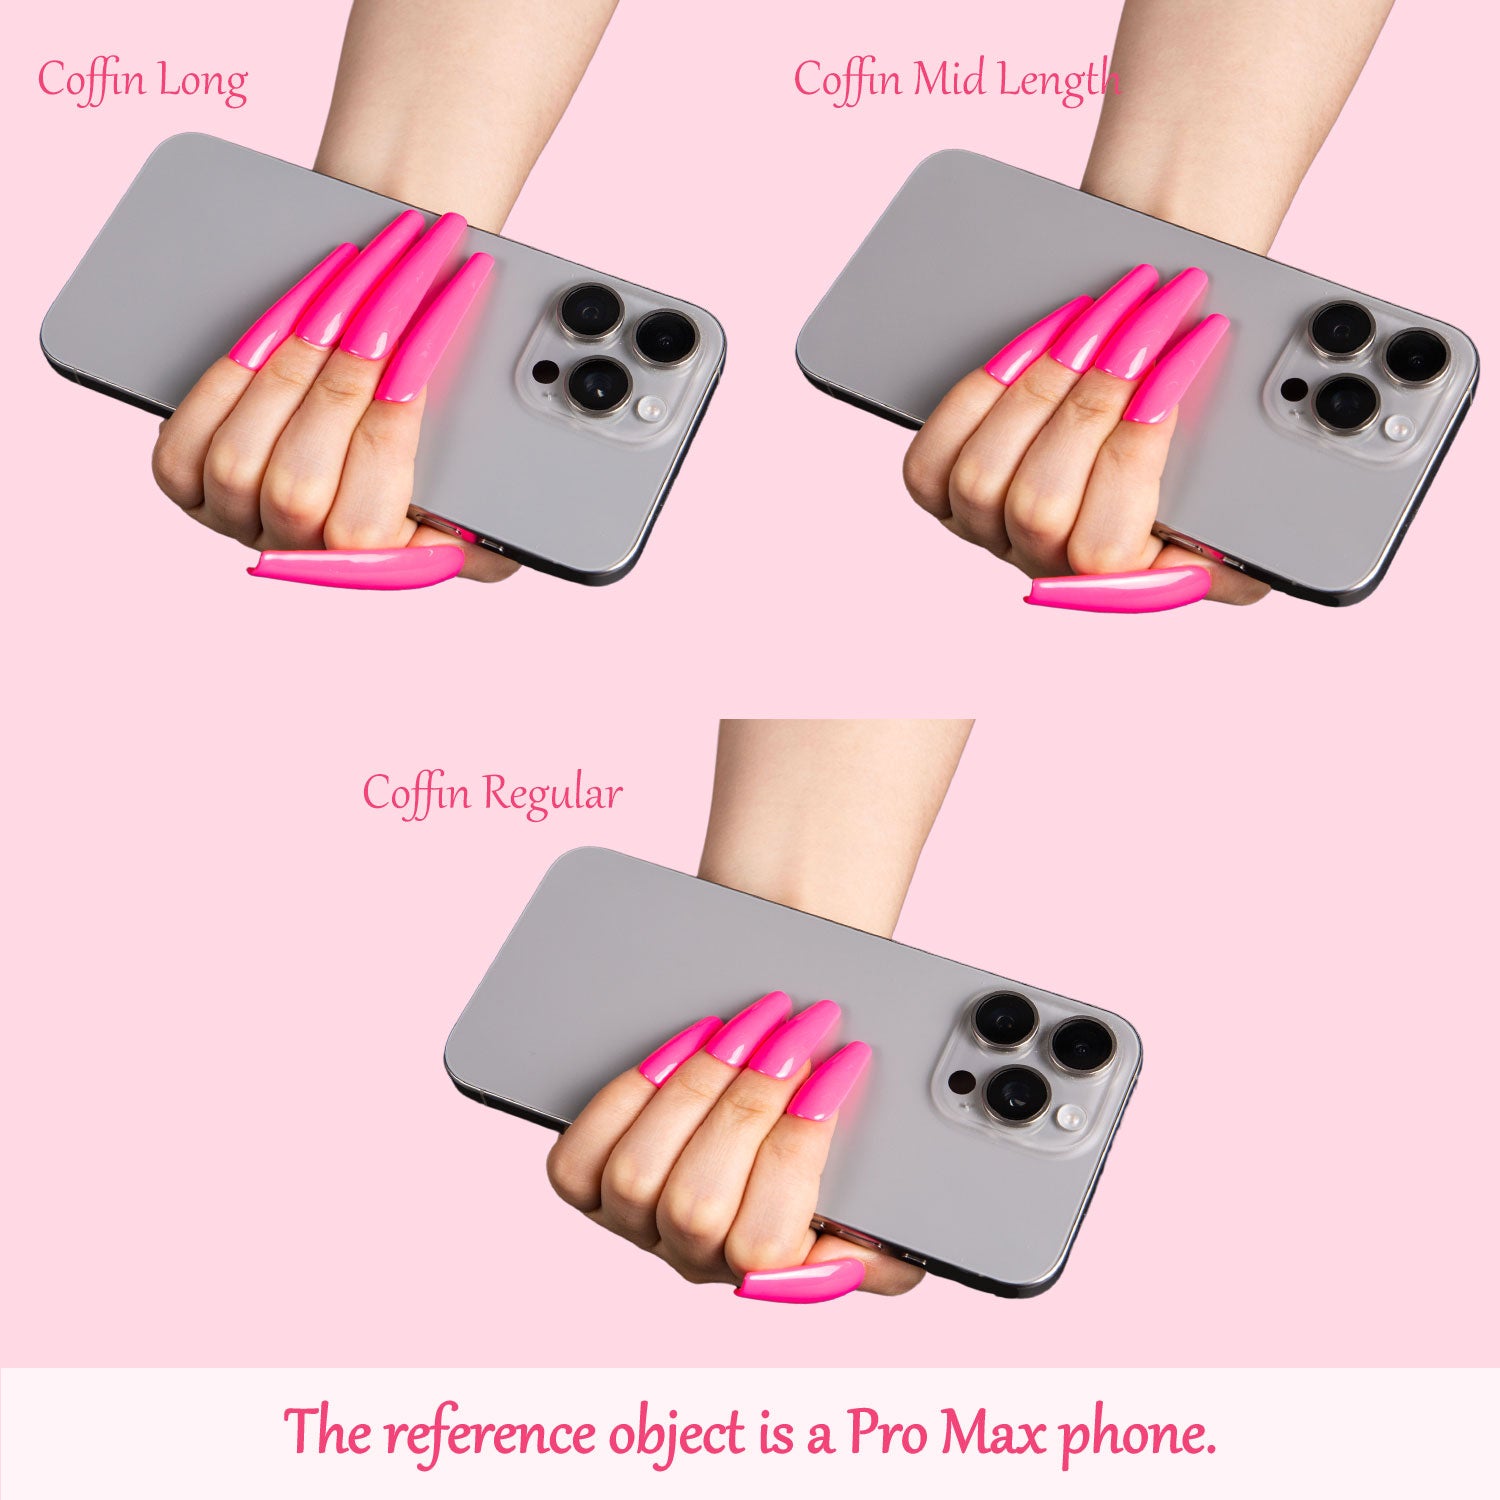 Three different lengths of pink coffin-shaped press-on acrylic nails, labeled Coffin Long, Coffin Mid Length, and Coffin Regular, with each hand holding a Pro Max phone for size reference.